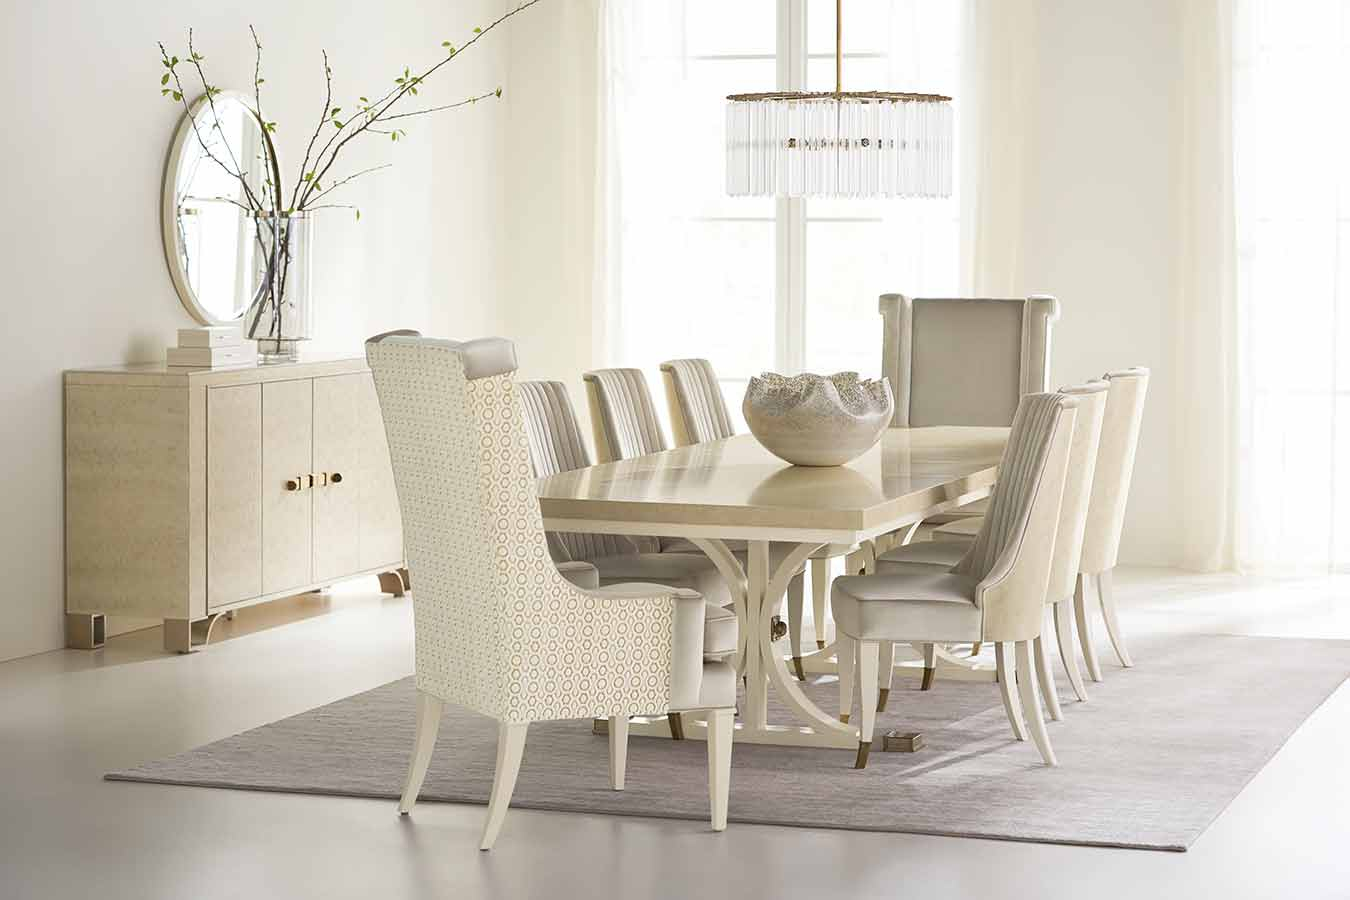 Dining Room Furniture Contemporary Luxury Exclusive Modern regarding dimensions 1350 X 900